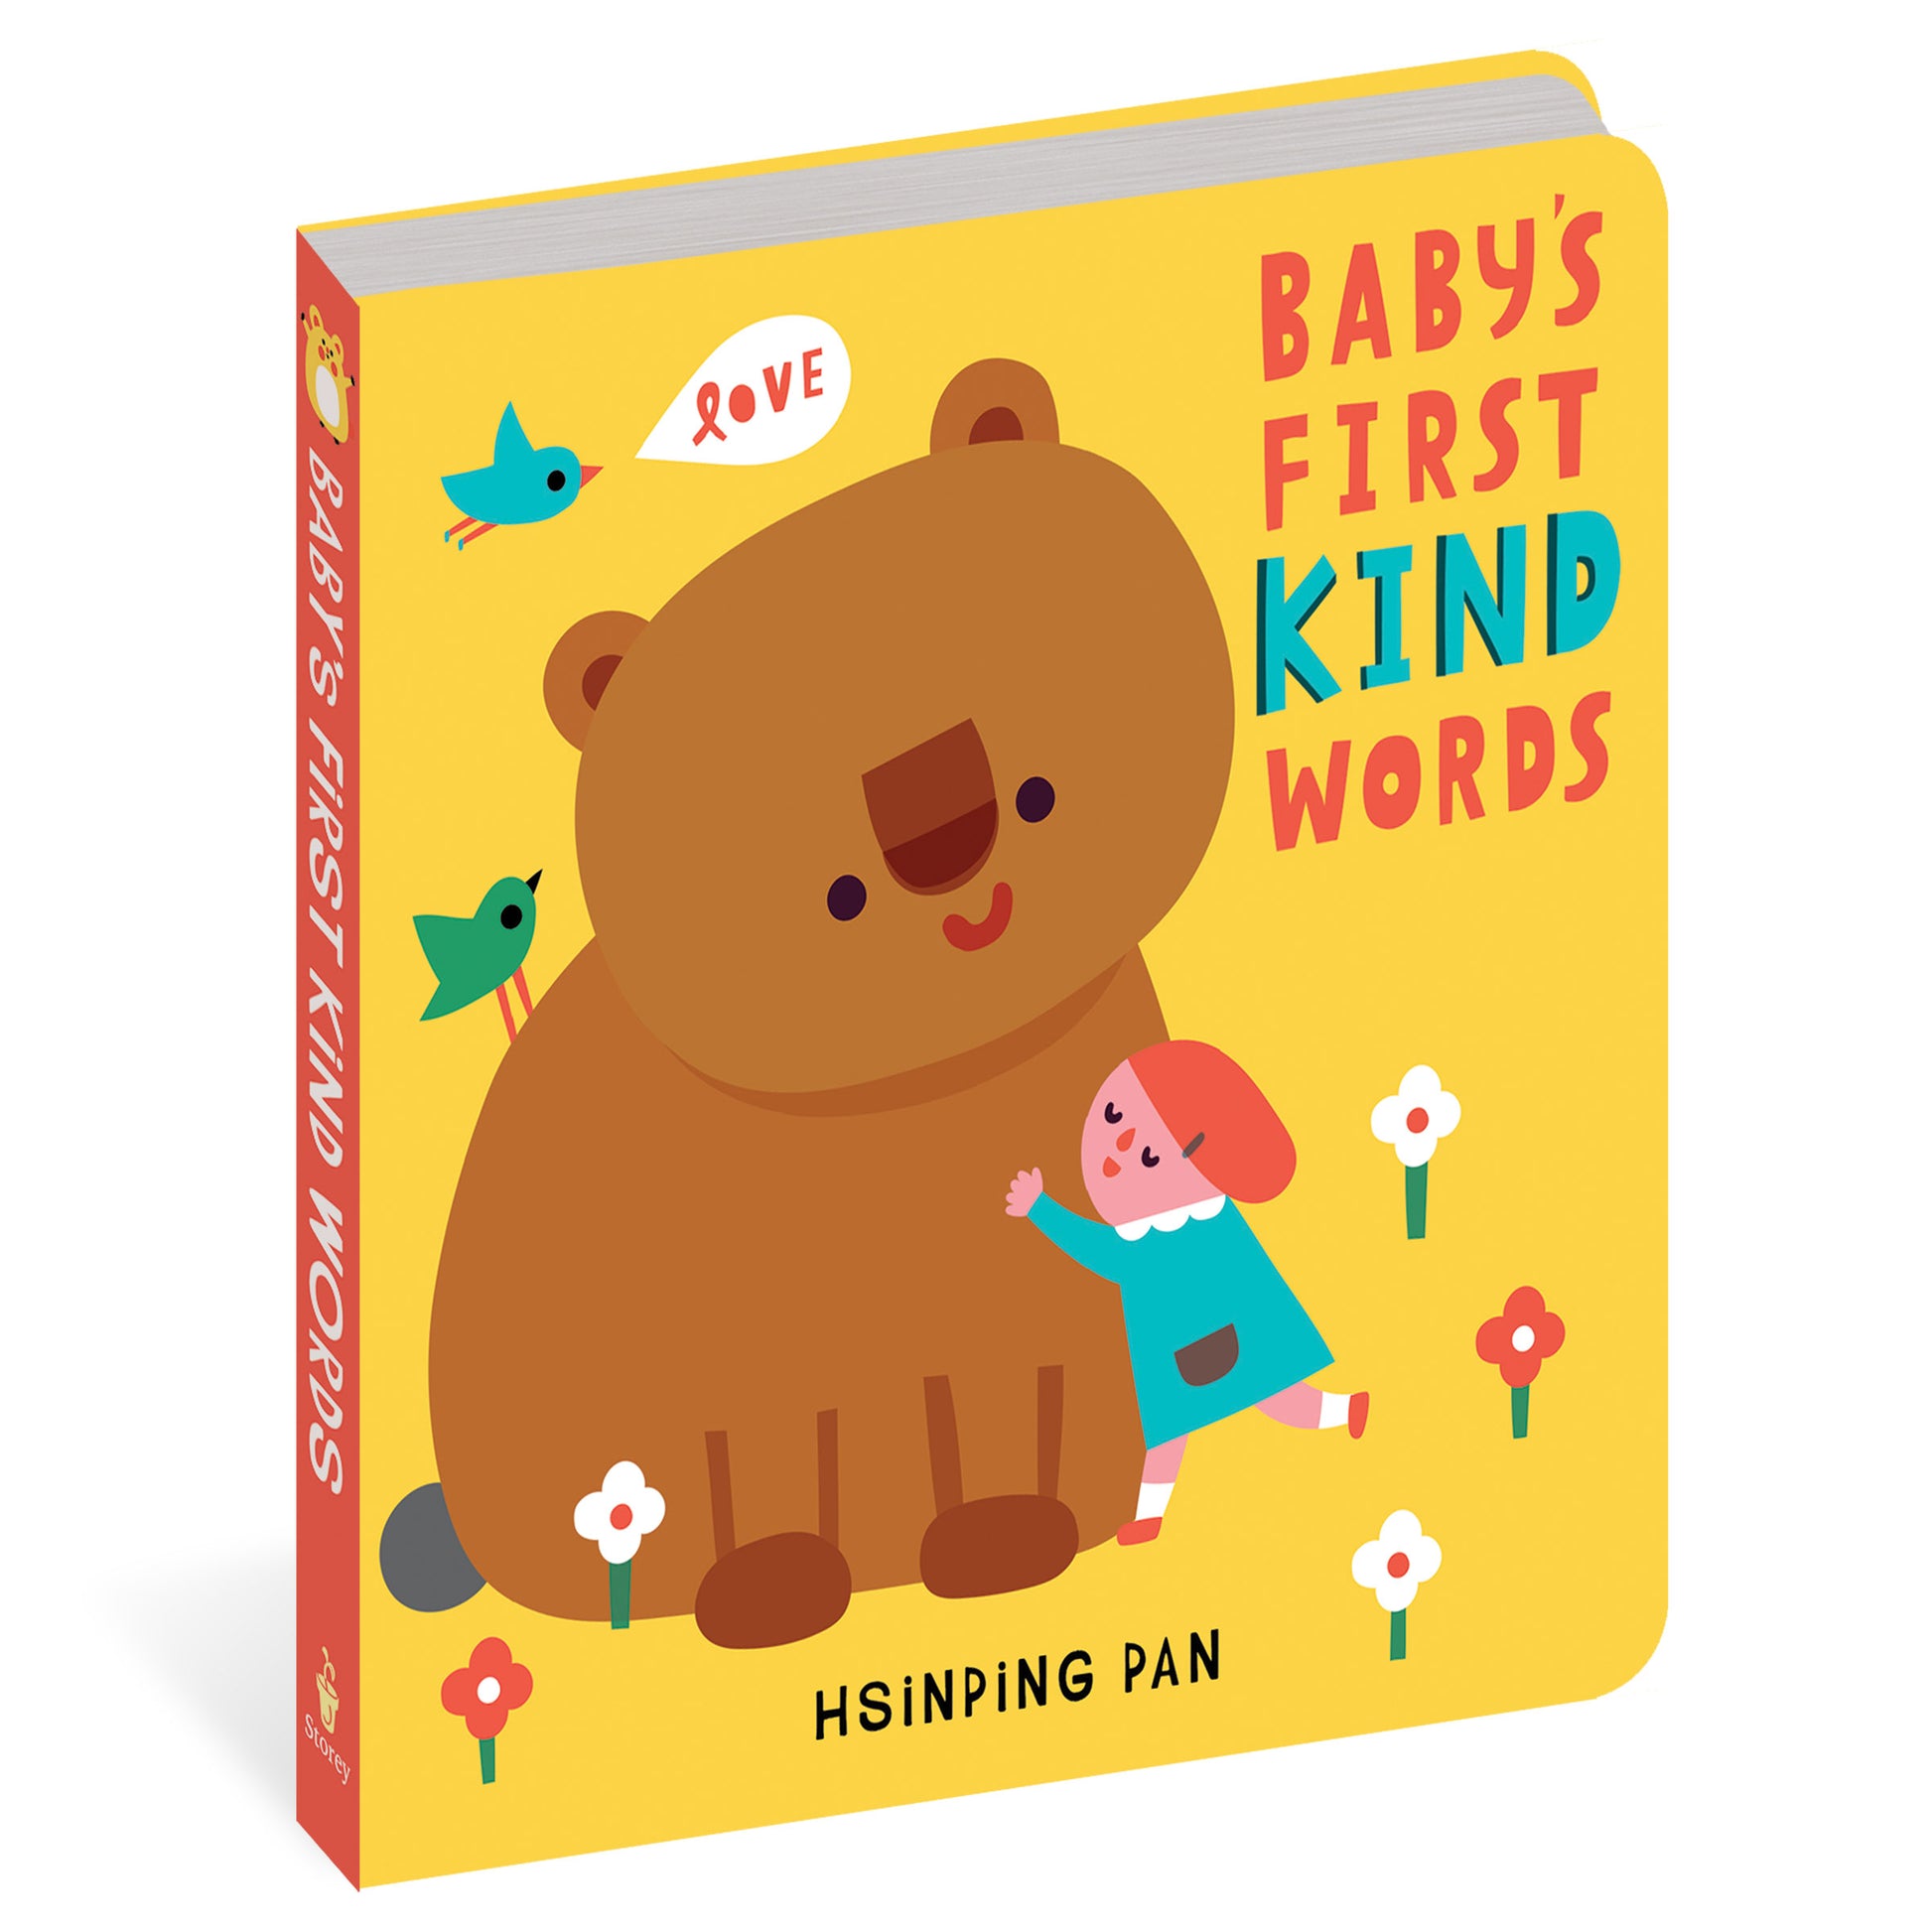 Baby's First Kind Words by Hsinping Pan